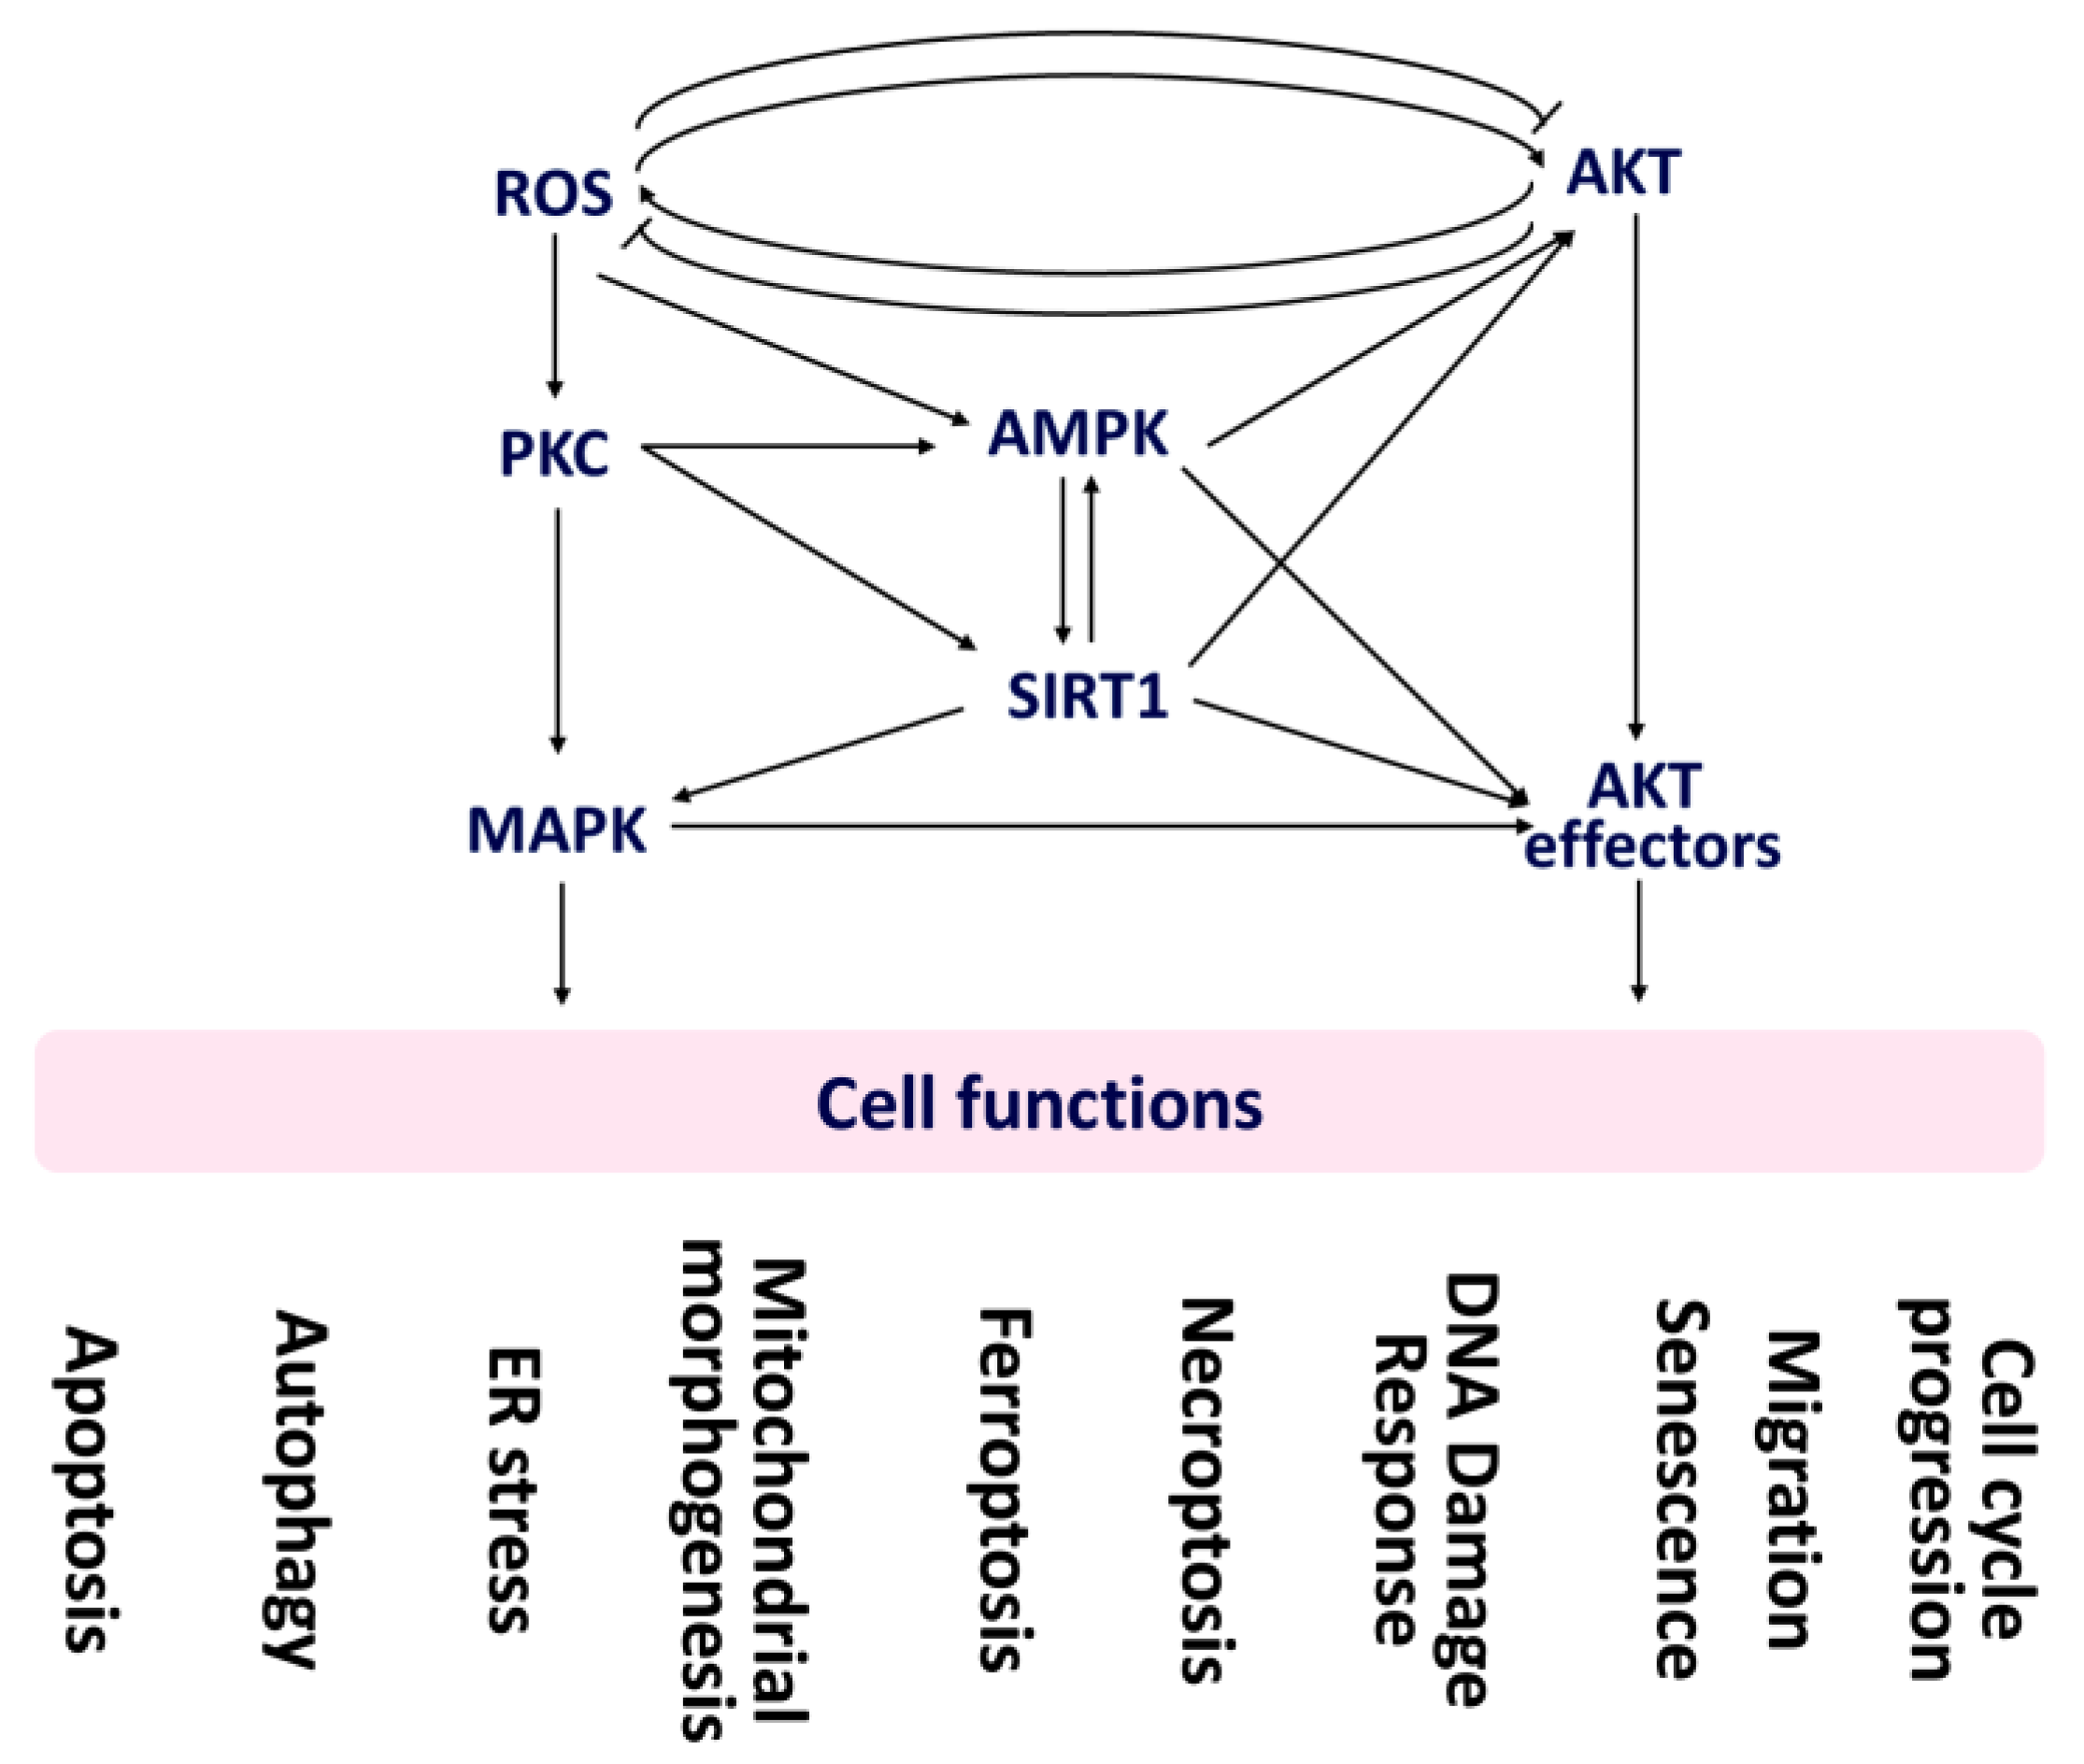 Antioxidants | Free Full-Text | The Impact of Oxidative Stress and AKT  Pathway on Cancer Cell Functions and Its Application to Natural Products